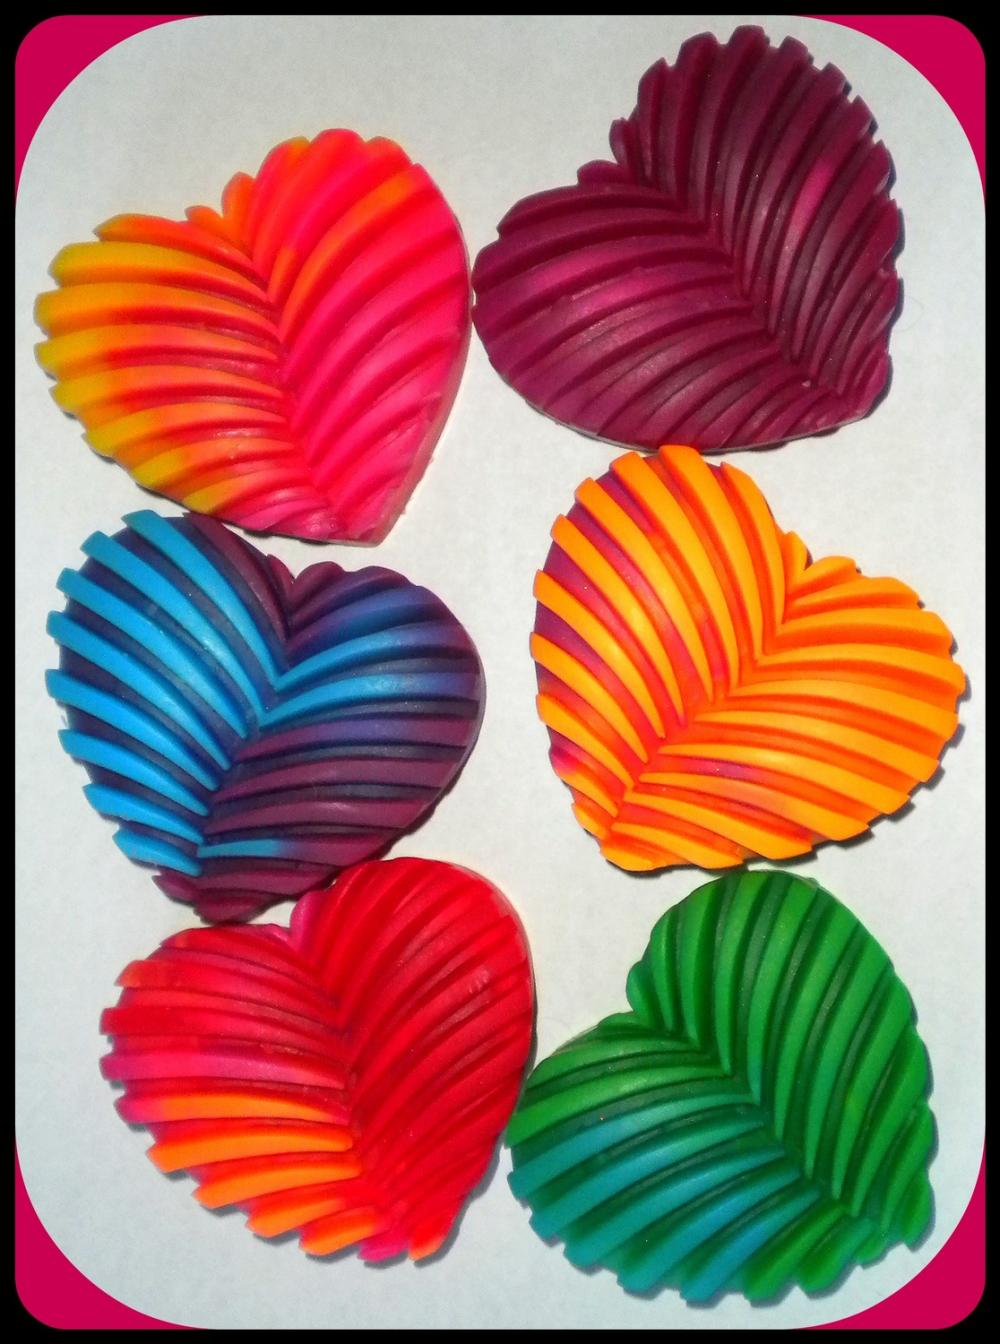 Soap - Tie Dye Heart Soap - Choose Your Colors And Scent